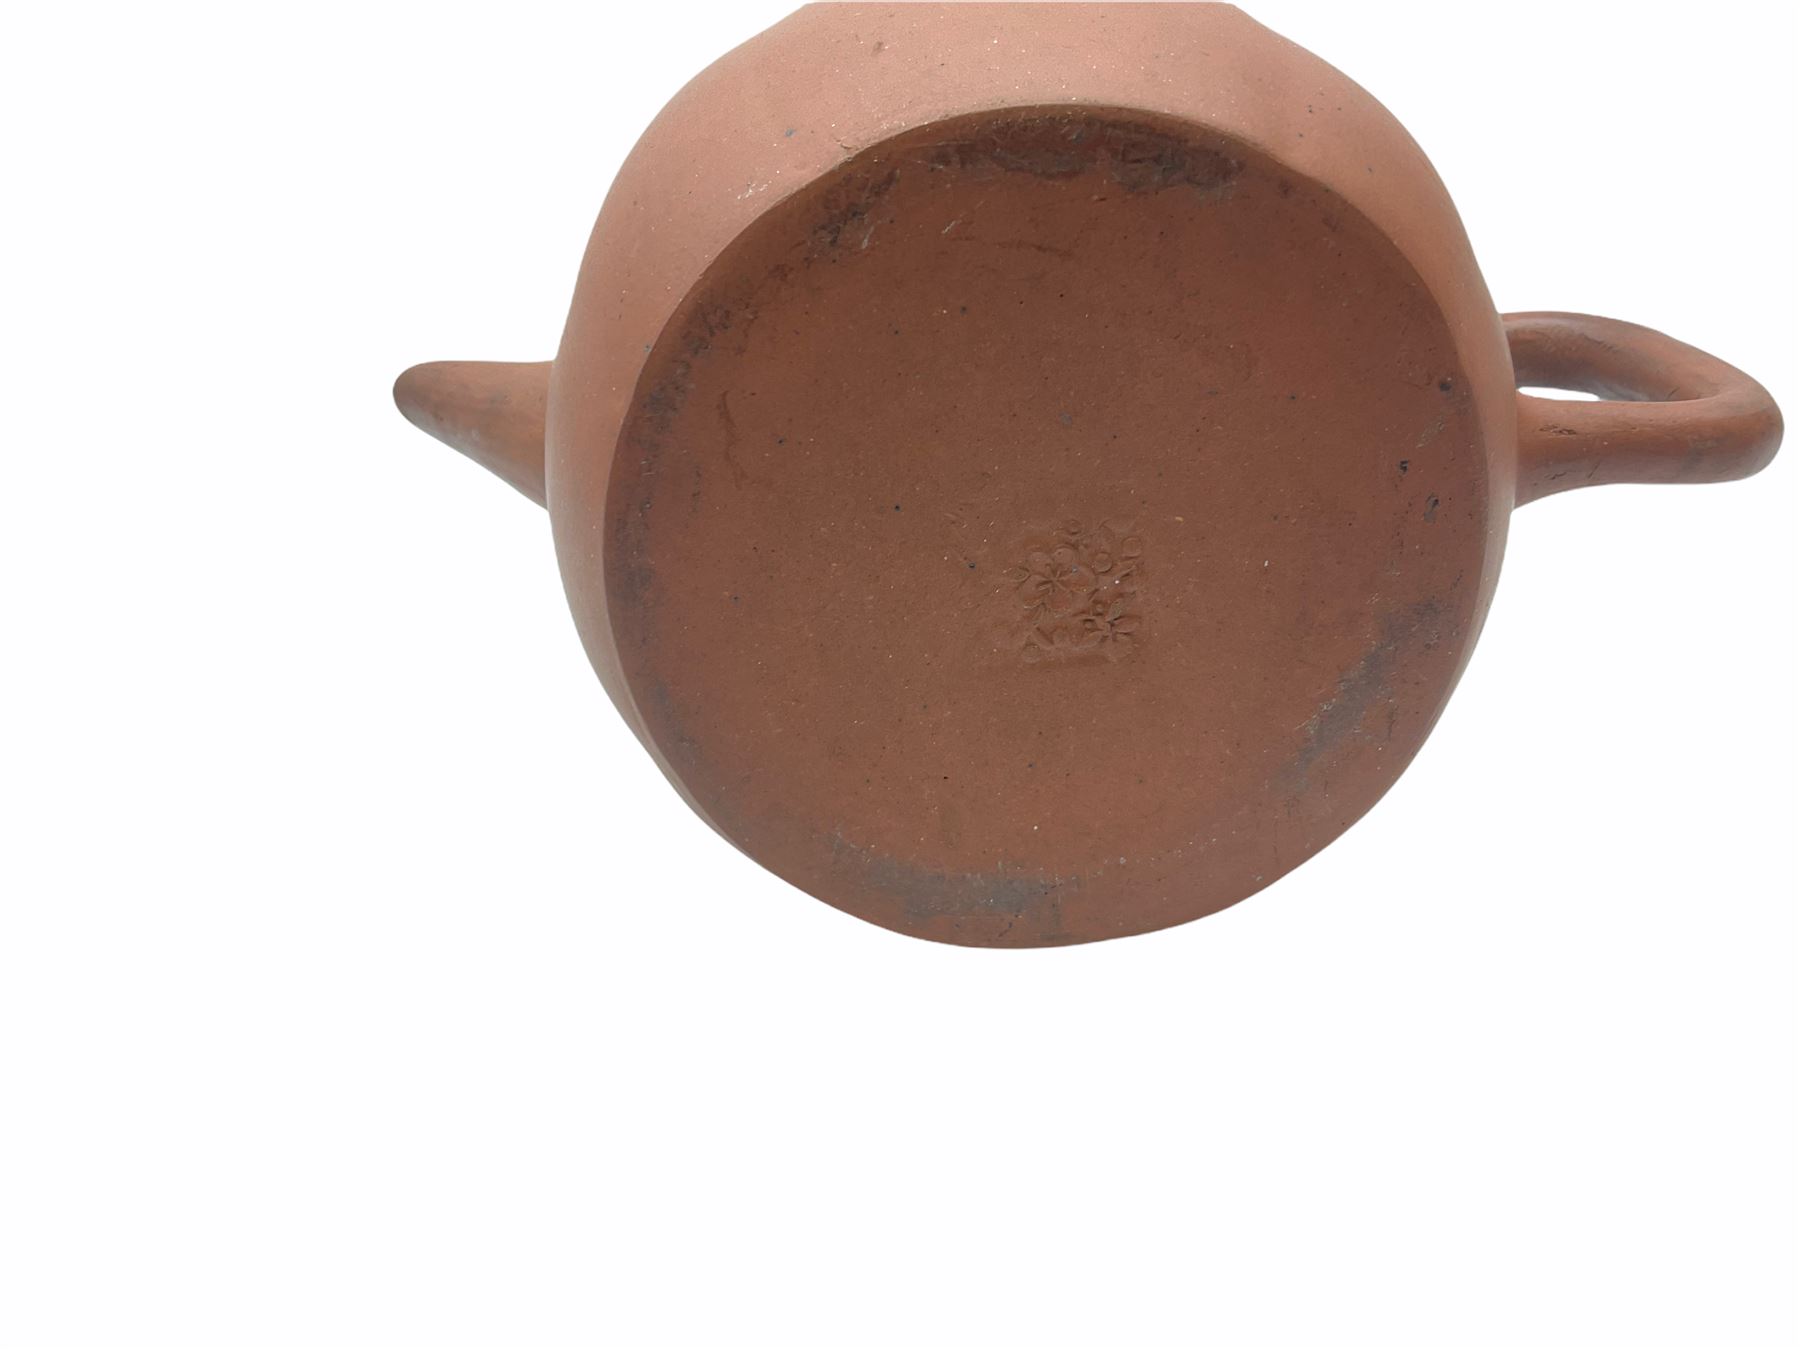 Chinese red terracotta teapot - Image 6 of 6